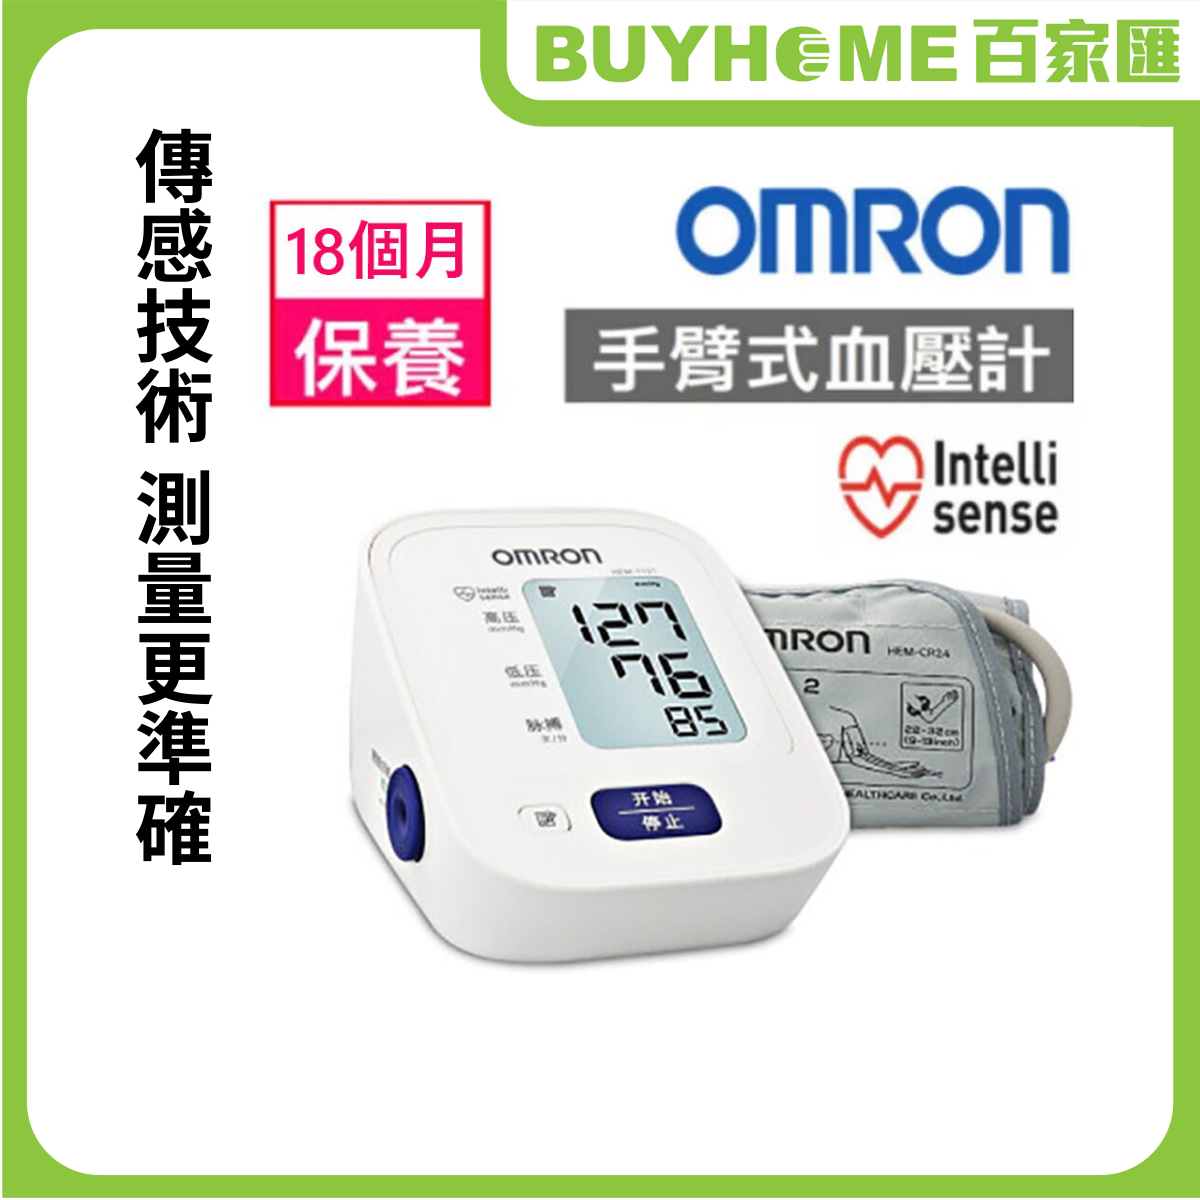 HEM-7121 Electronic Blood Pressure Monitor (Upper Arm Type) Chinese version [Parallel Import]